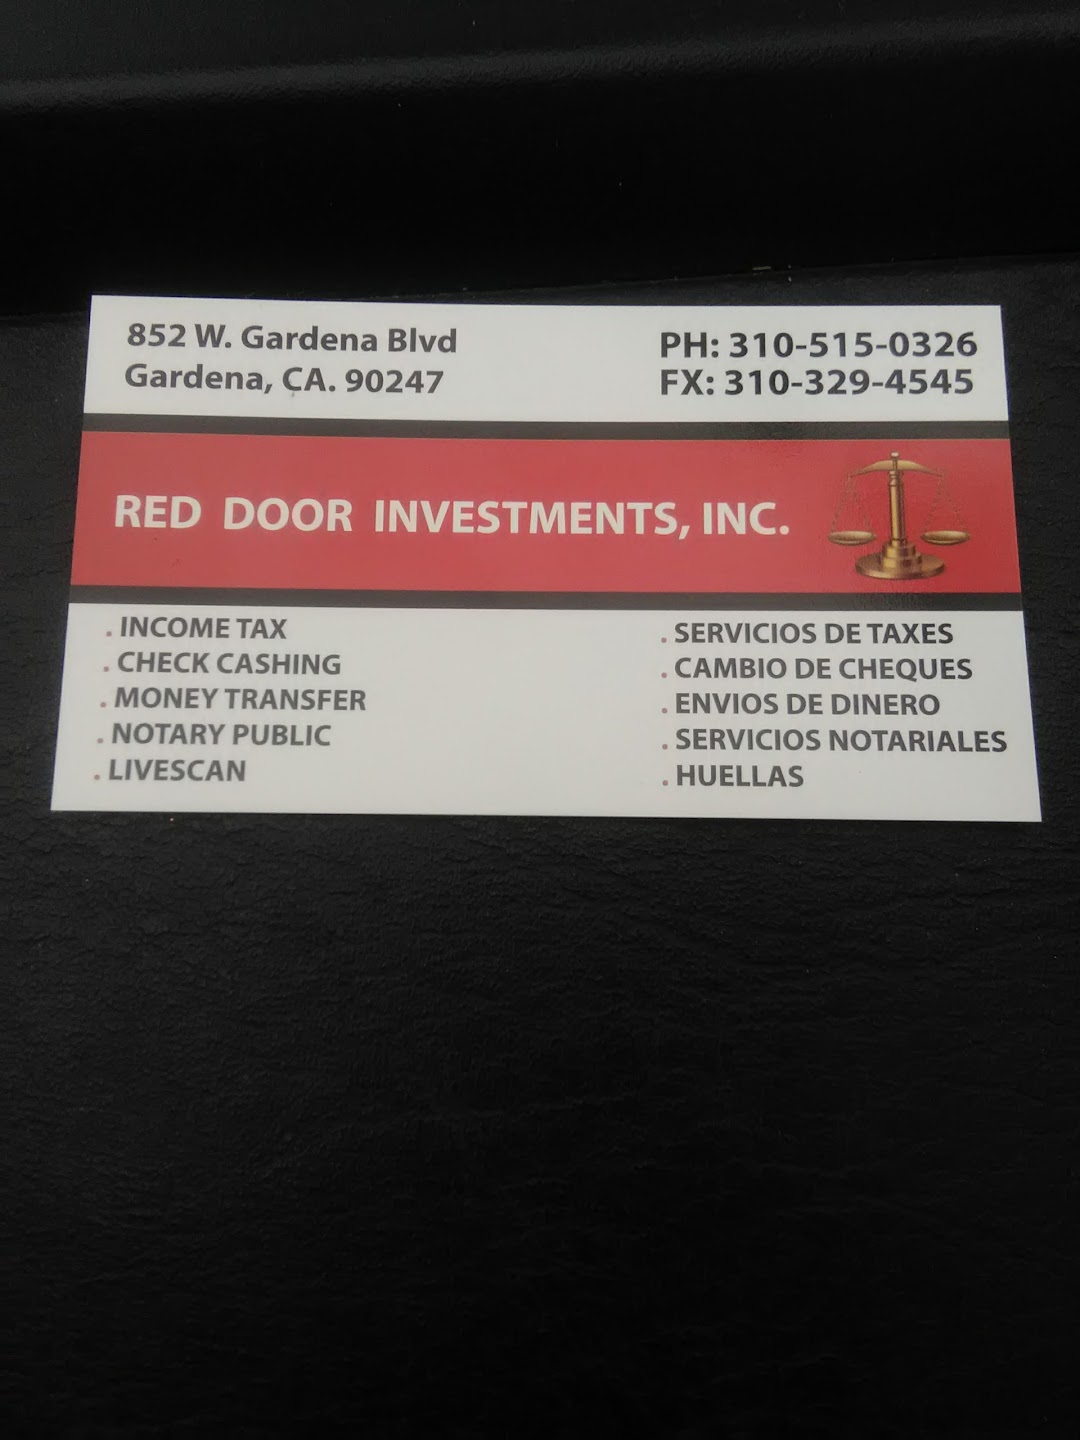 Red Door Investments Notary Public, Income Tax, Fingerprint Services, and wedding Officiants